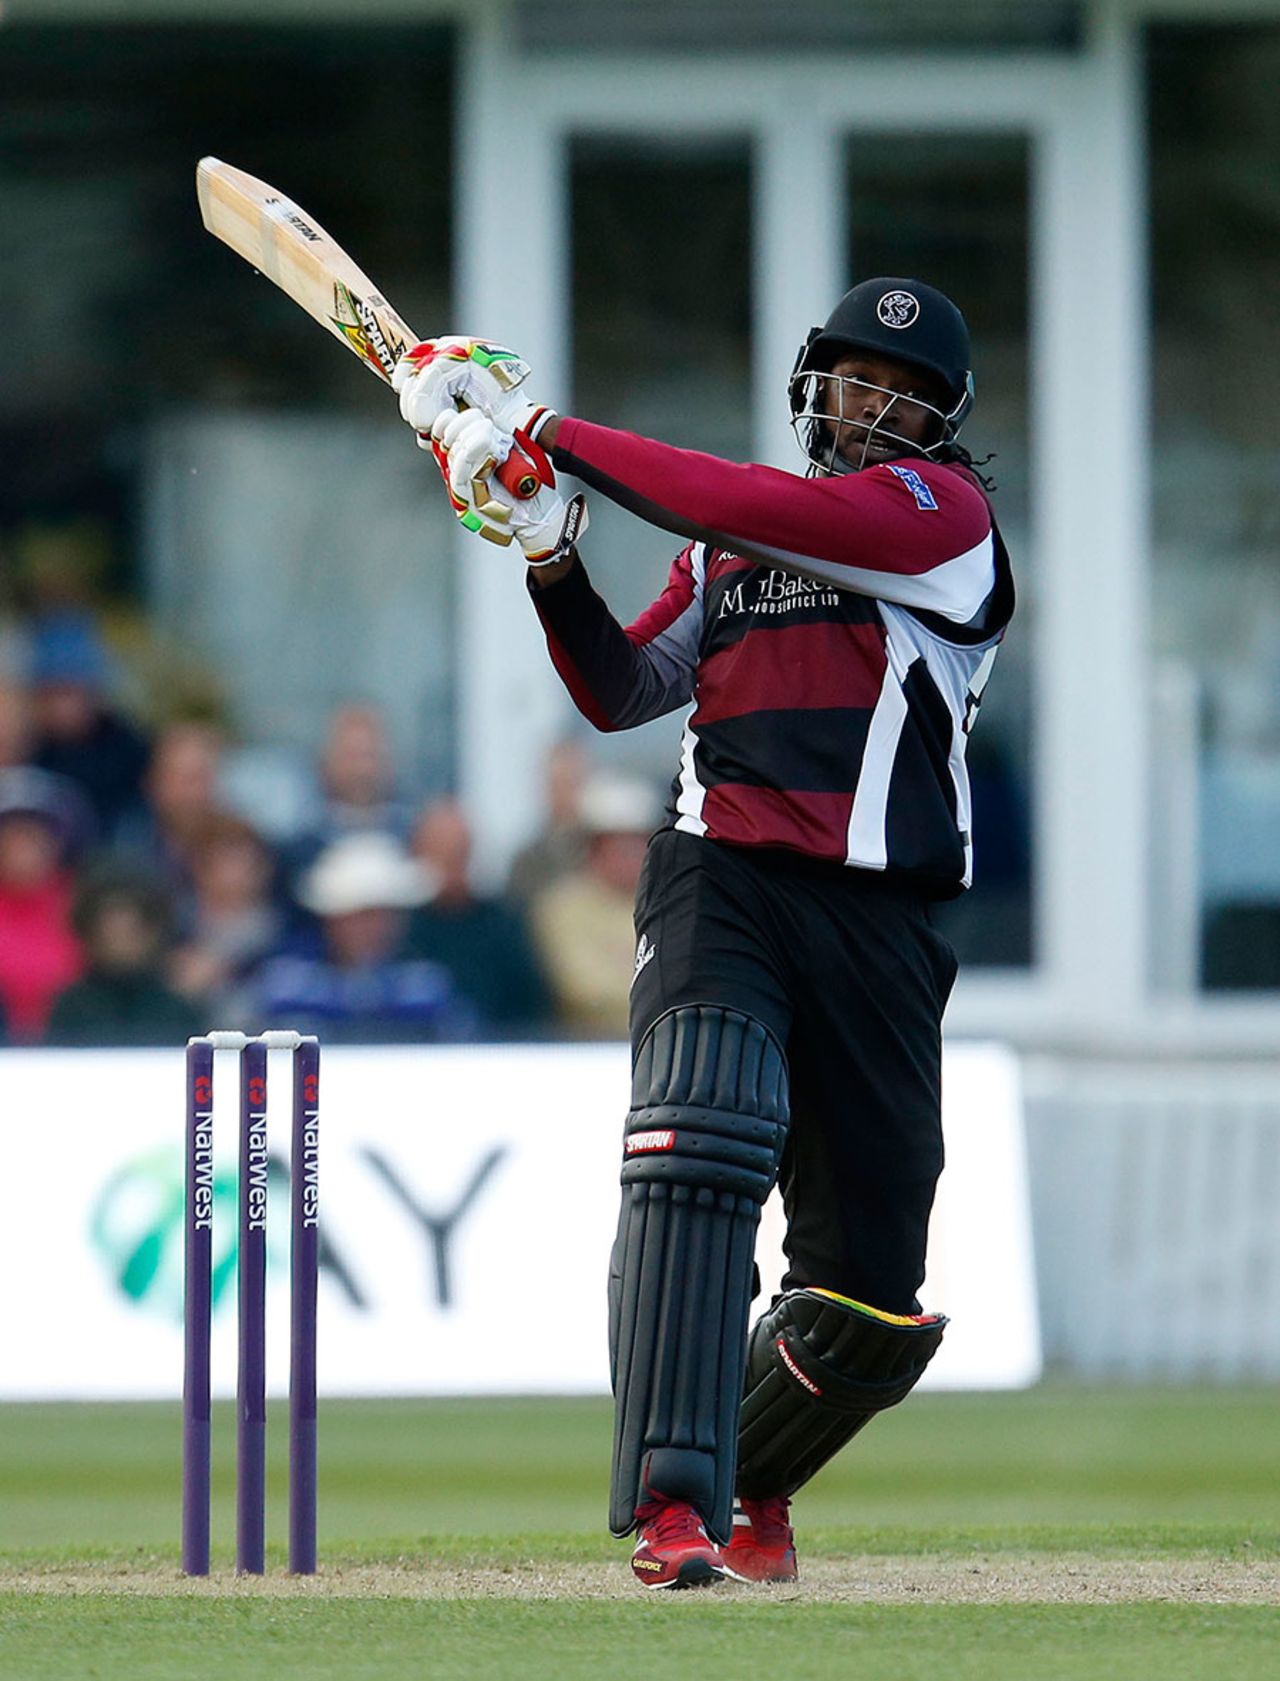 Chris Gayle's took his tournament tally to 328, Somerset v Hampshire, NatWest T20 Blast South Group, Taunton, June 5, 2015